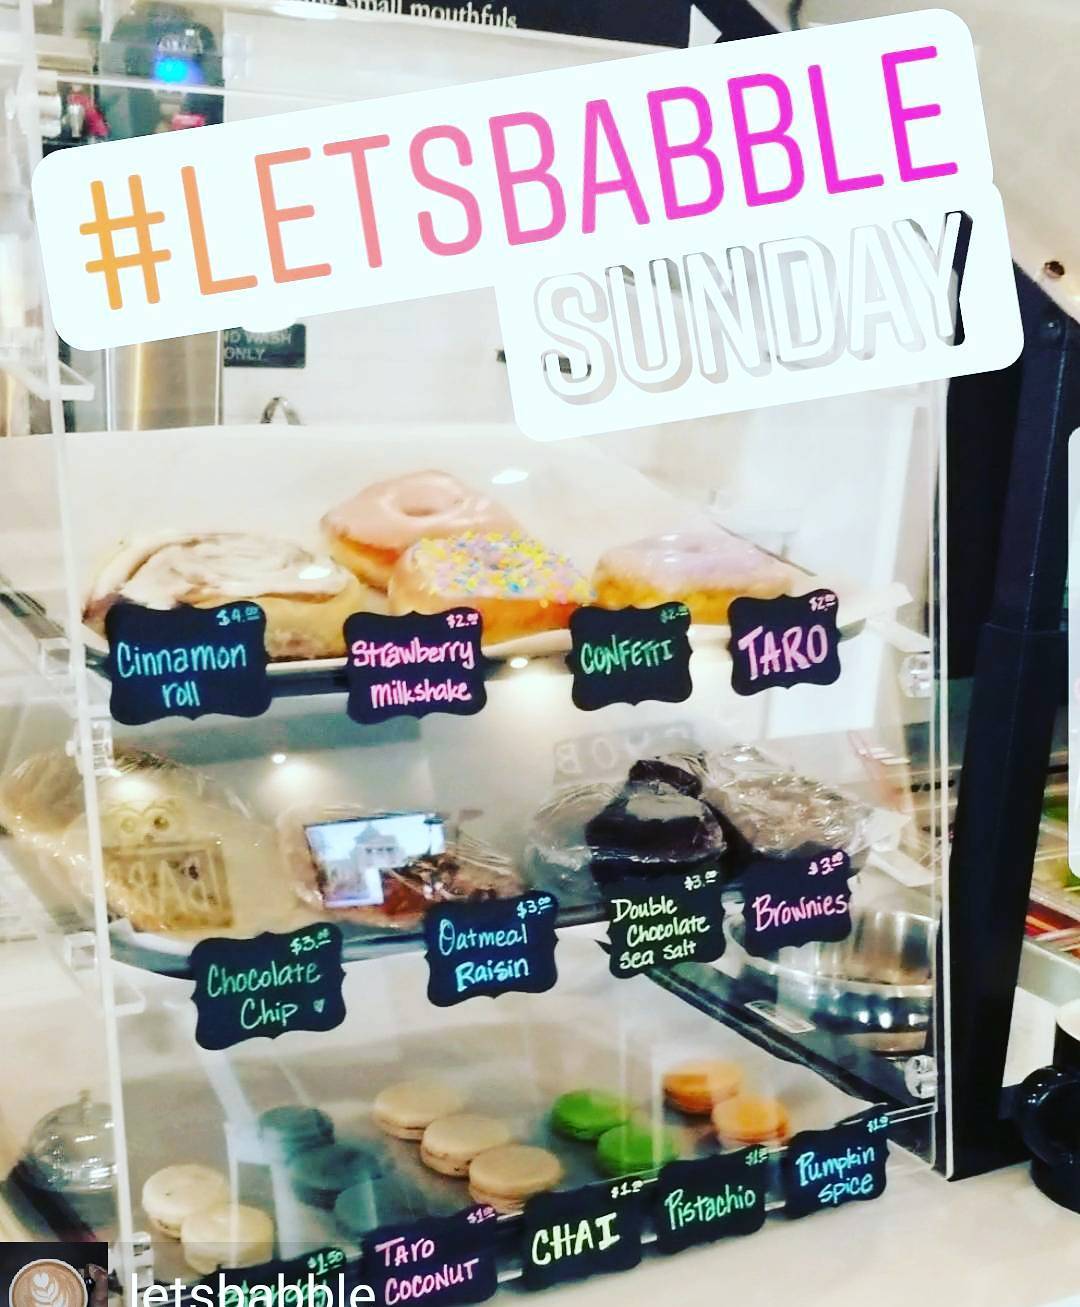 I love @letsbabble…I was jazzed when they opened up! Such an awesome and unique self-serve…yes… self serve…Bubble Tea! Imagine this…a whole bar of Boba, Tapioca, Jellies and Seeds and you get to create, make & enjoy! 
Now you can snag Belle Macarons and goodies in their super cute shop that’s open late 👍 for that anytime bubble tea, coffee & macaron craving!
@bellekitchenokc @letsbabble #okc #oklahomacity #Oklahoma #bubbletea #boba #macaron #macarons #visitokc #keepitlocalok